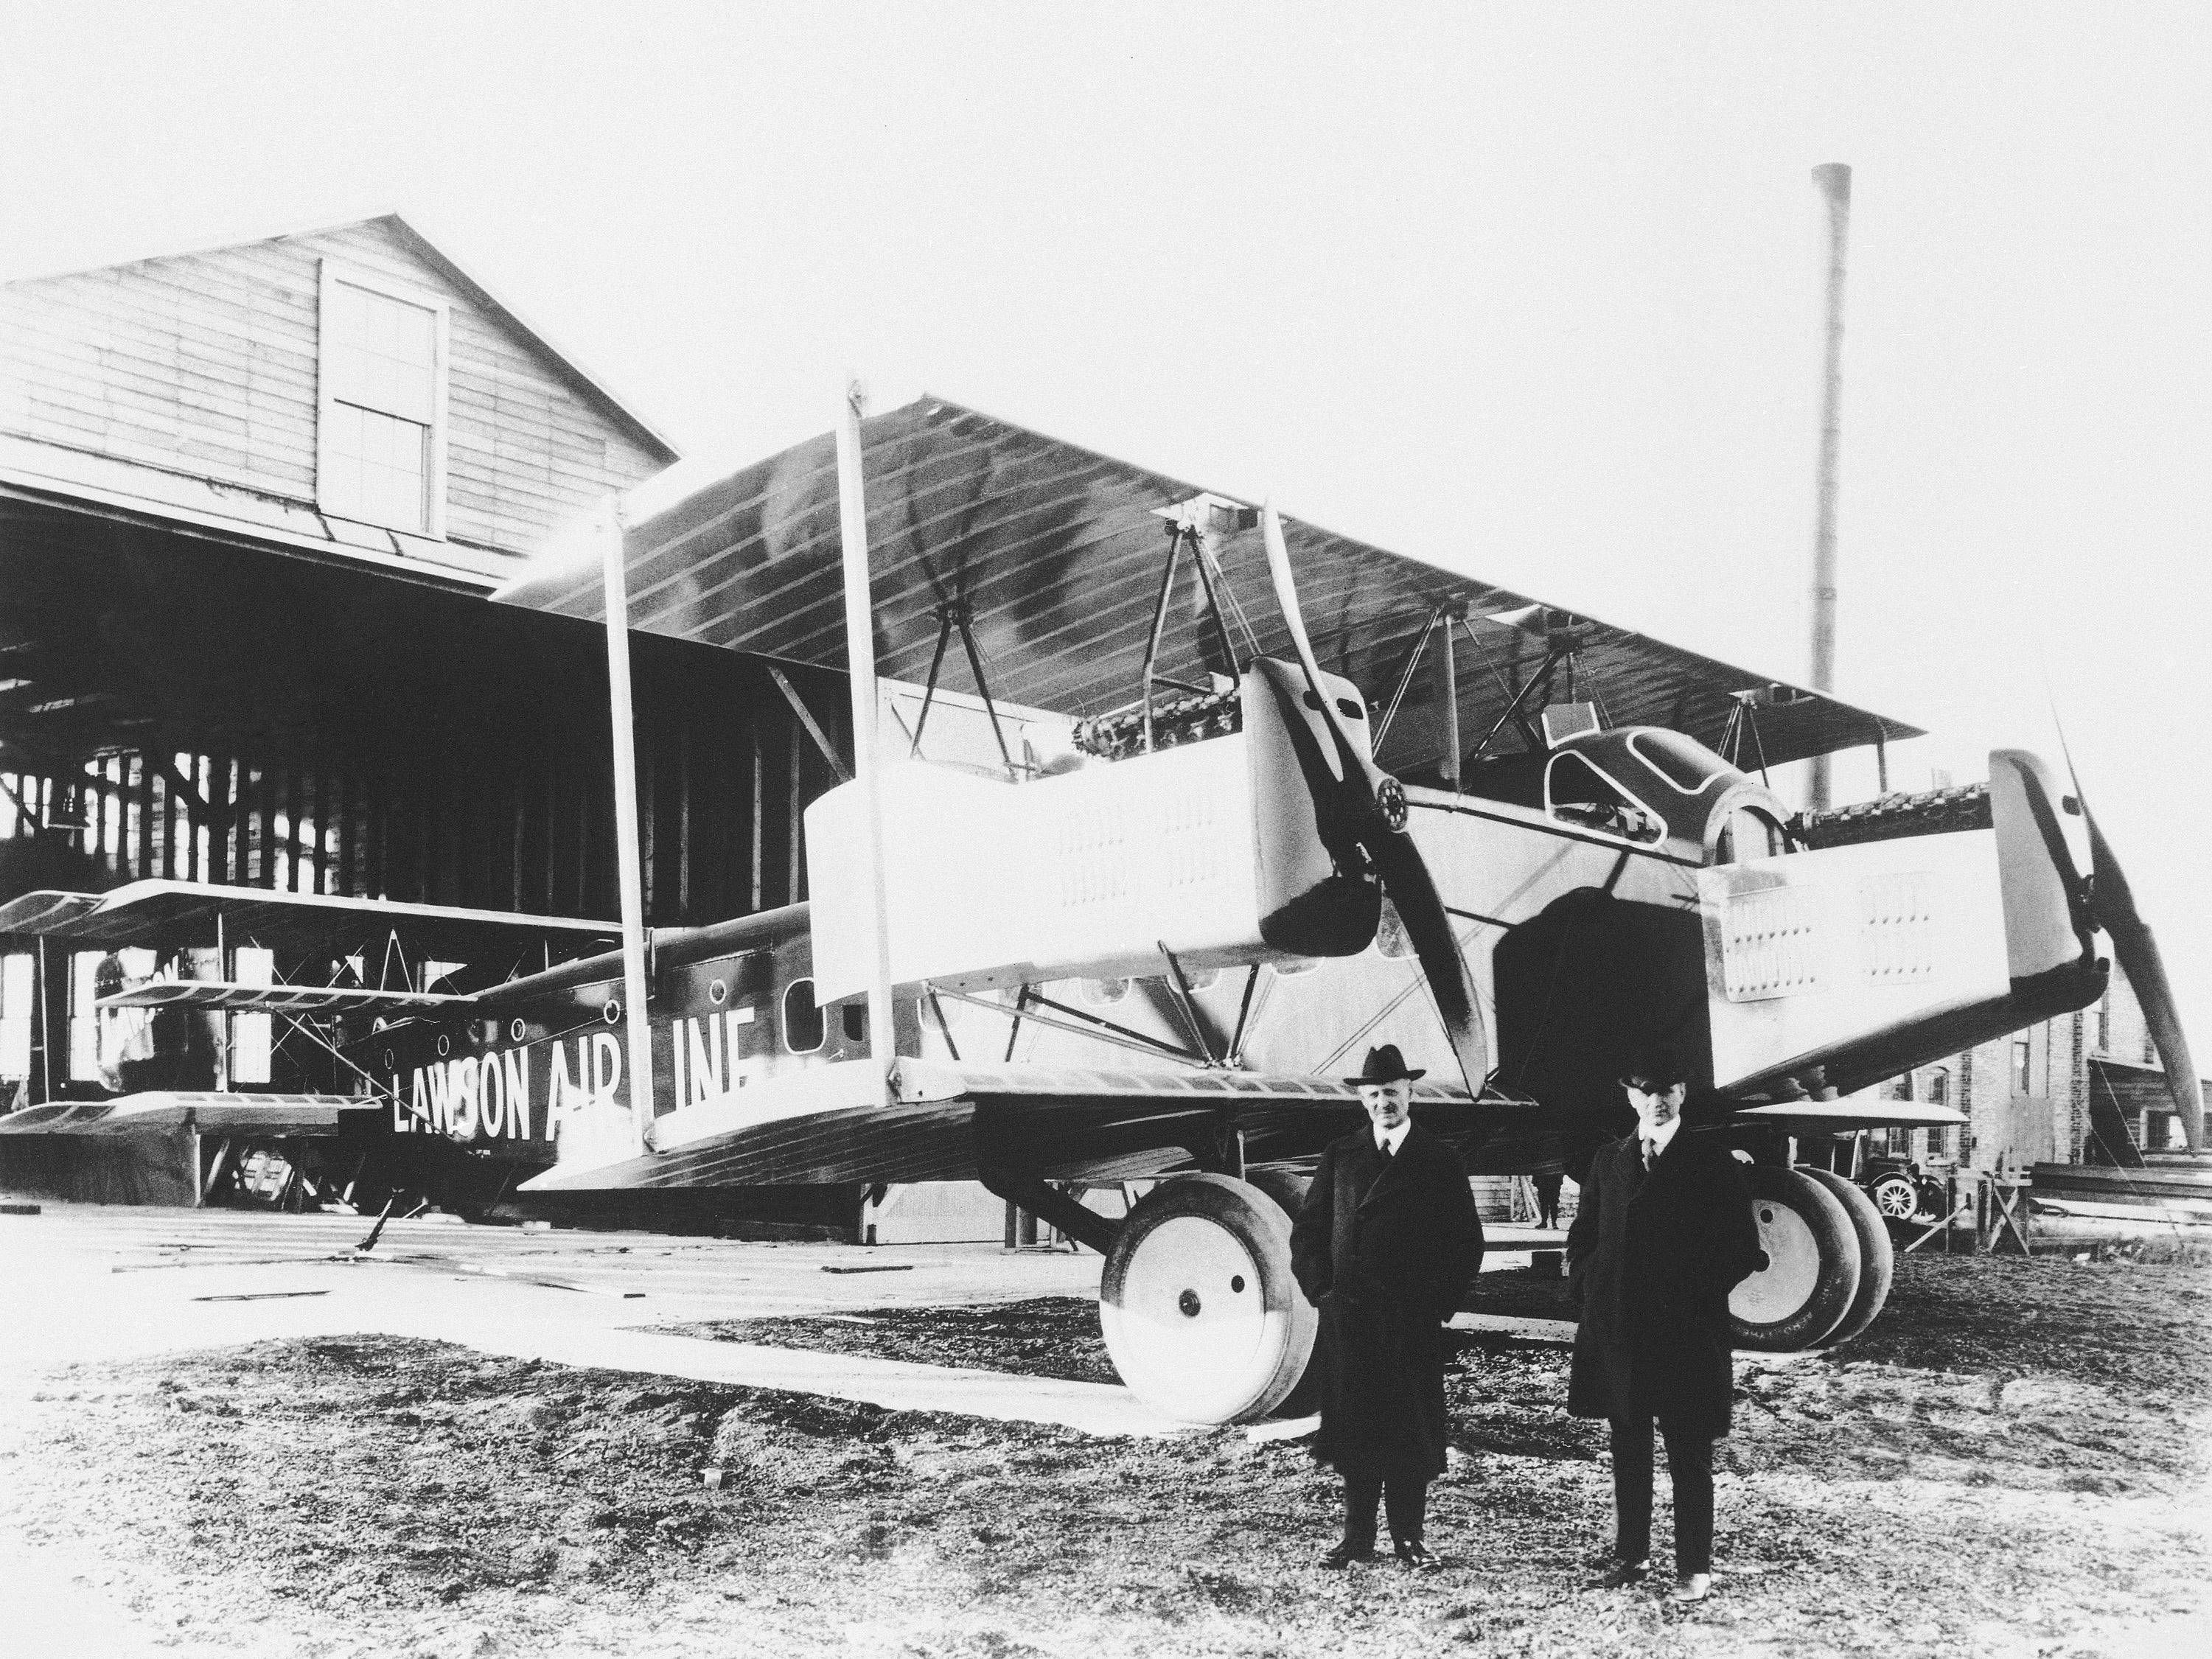 <p>Lawson's C-2 biplane airliner completed flights from Milwaukee to New York City and Washington, DC, in 1919. Its introduction led to commercial air travel becoming more common, <a href="https://airwaysmag.com/how-global-travel-took-off/" rel="noopener">Airways magazine</a> reported.</p><p>But when he tried to build a larger passenger aircraft designed to carry 34 people in 1921, it crashed in a field, bringing an end to his company, according to the <a href="https://airandspace.si.edu/collection-archive/alfred-w-lawson-collection/sova-nasm-1999-0046">National Air and Space Museum</a>.</p>